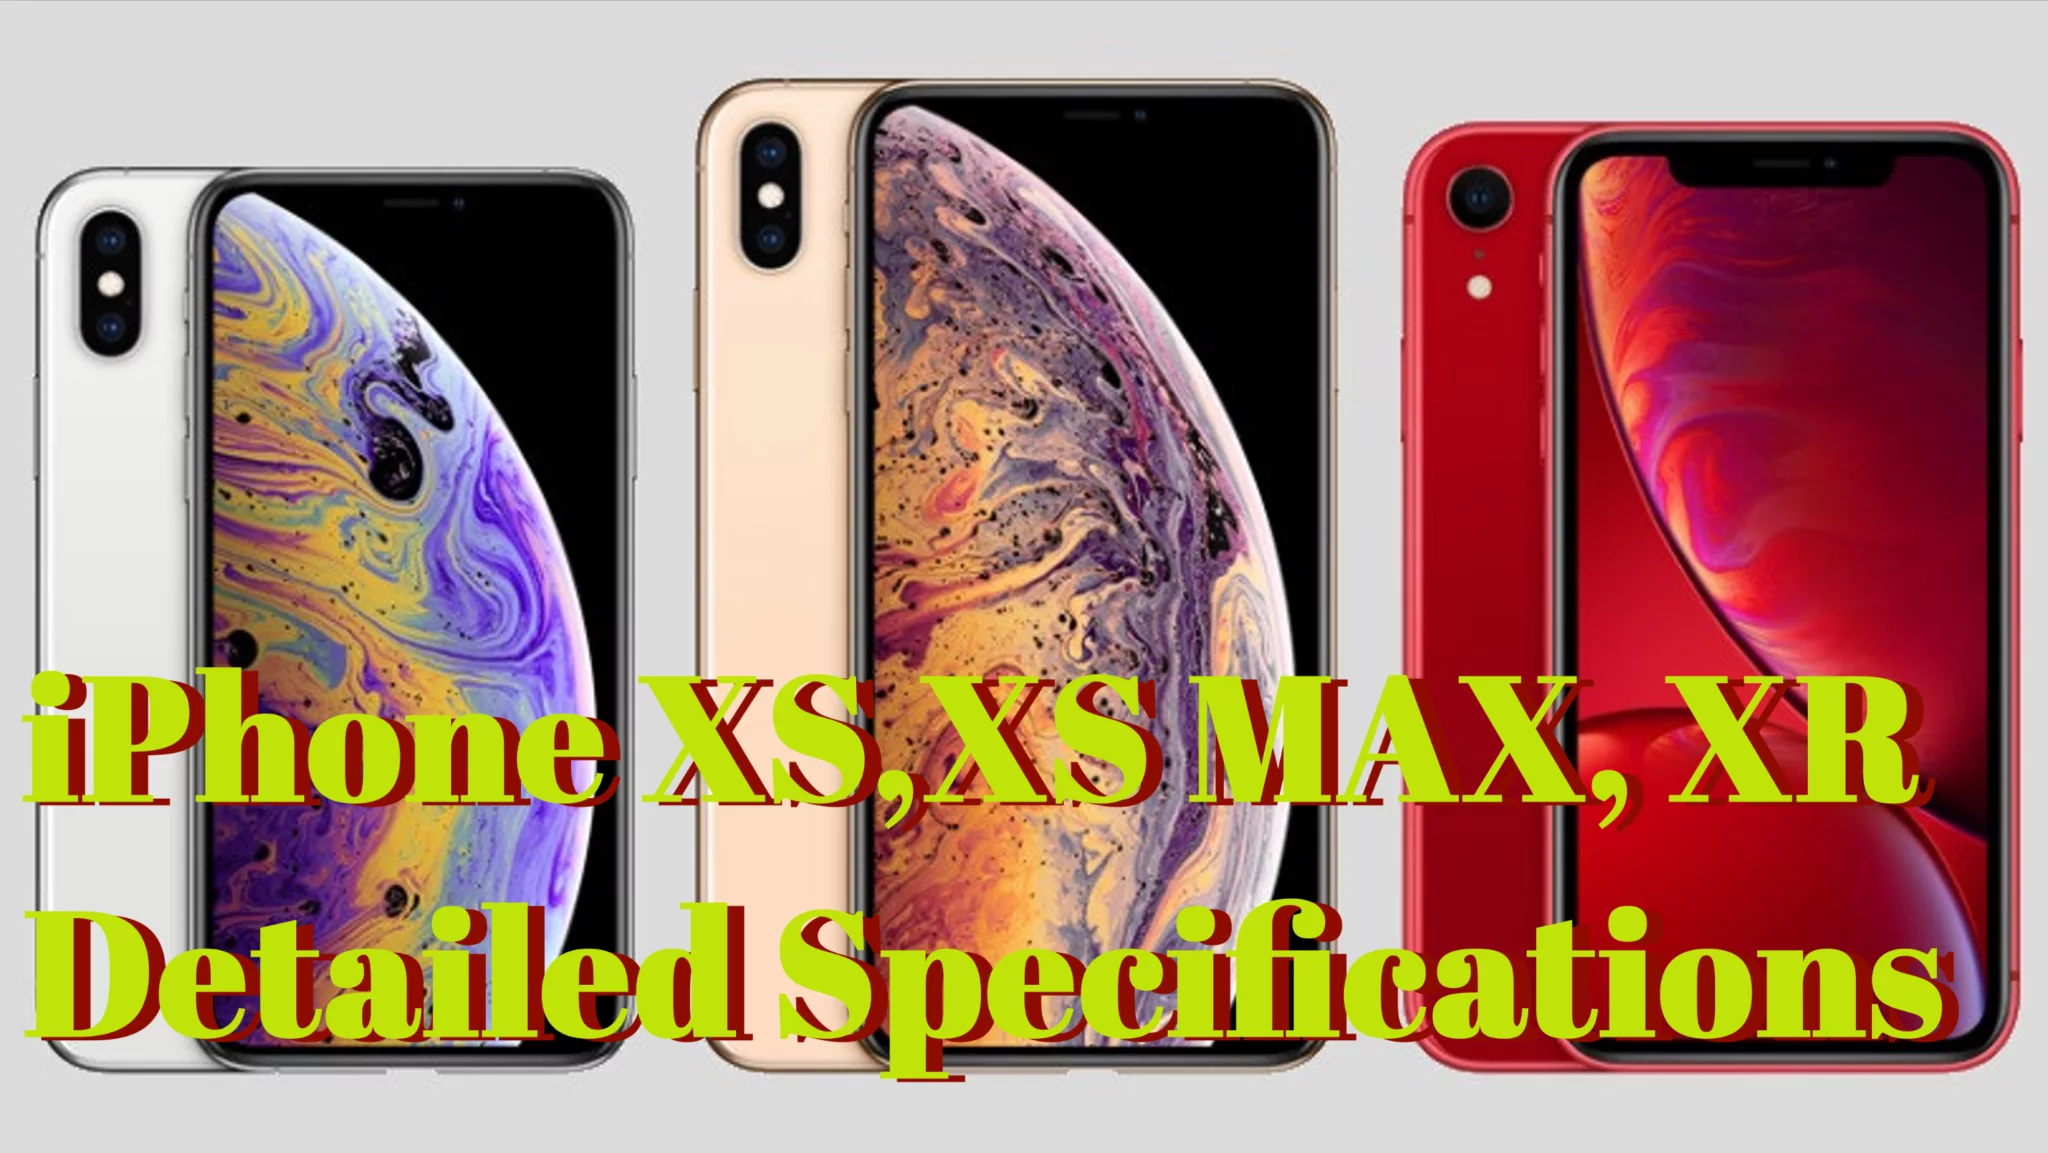 Apple iPhone XS, XS Max, XR Detailed Specifications [Review]